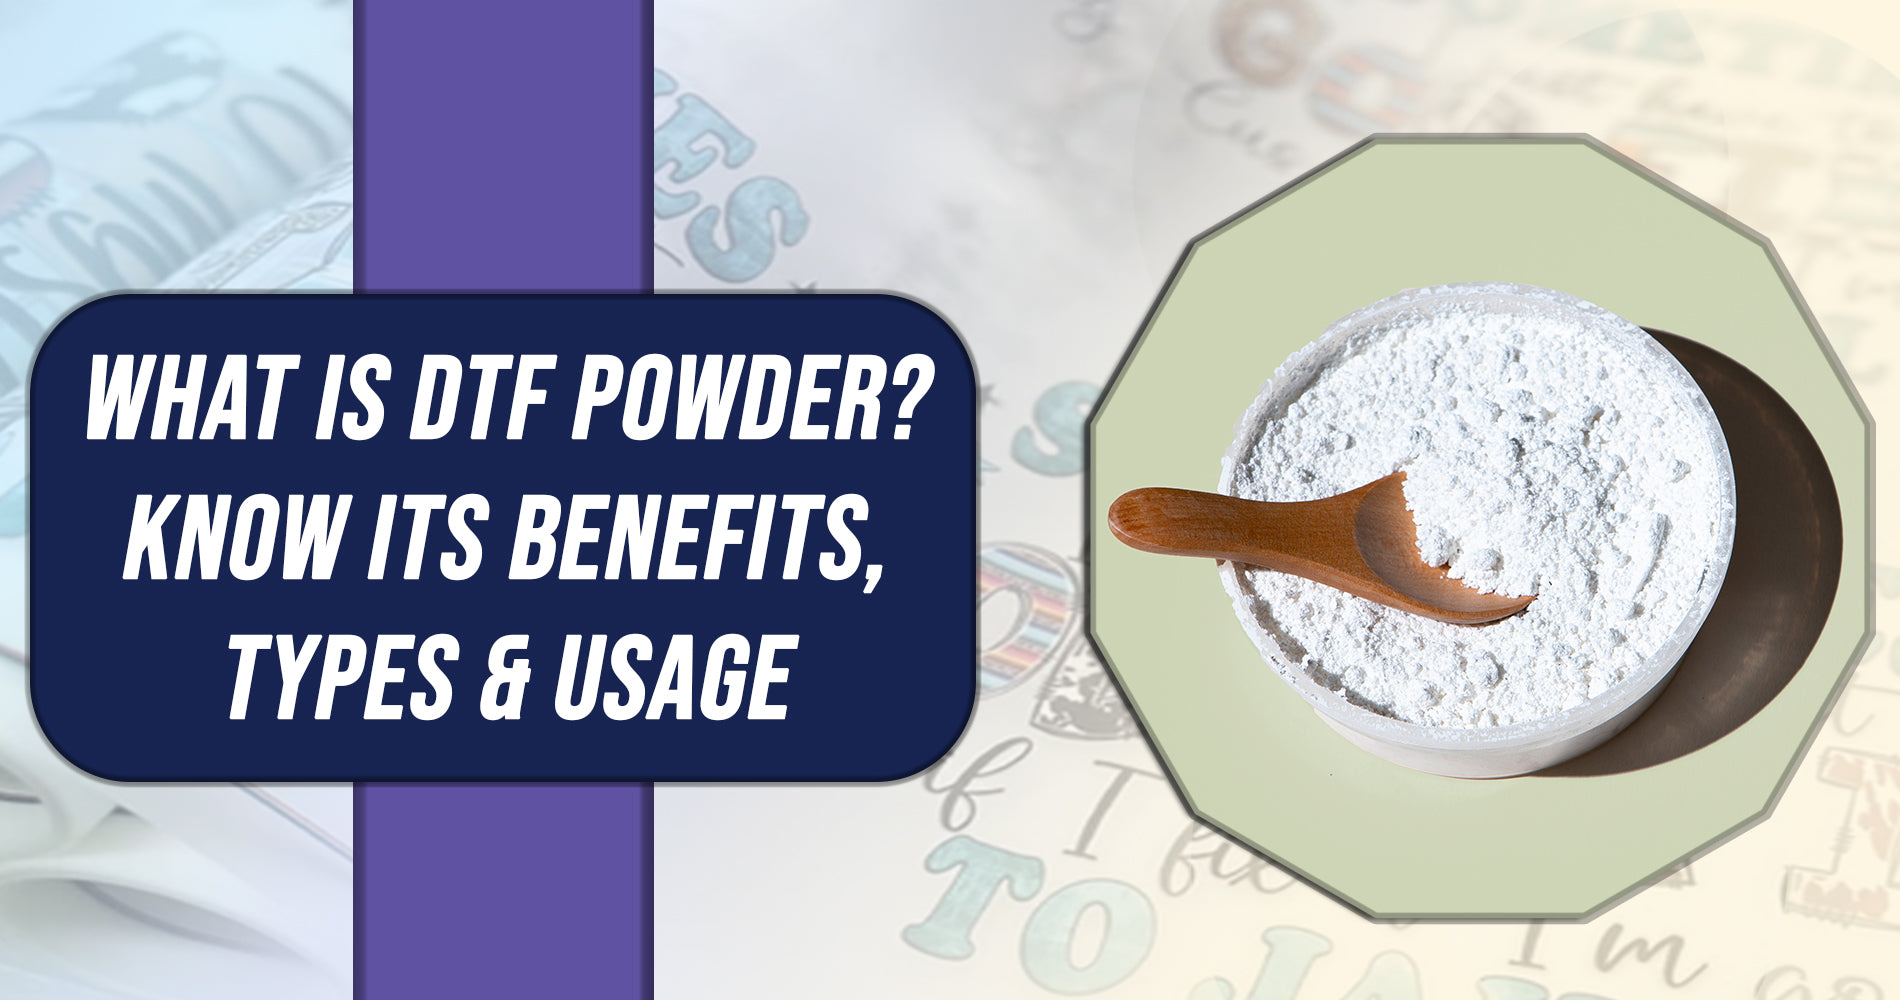 What is DTF Powder? Know its Benefits, Types & Applications